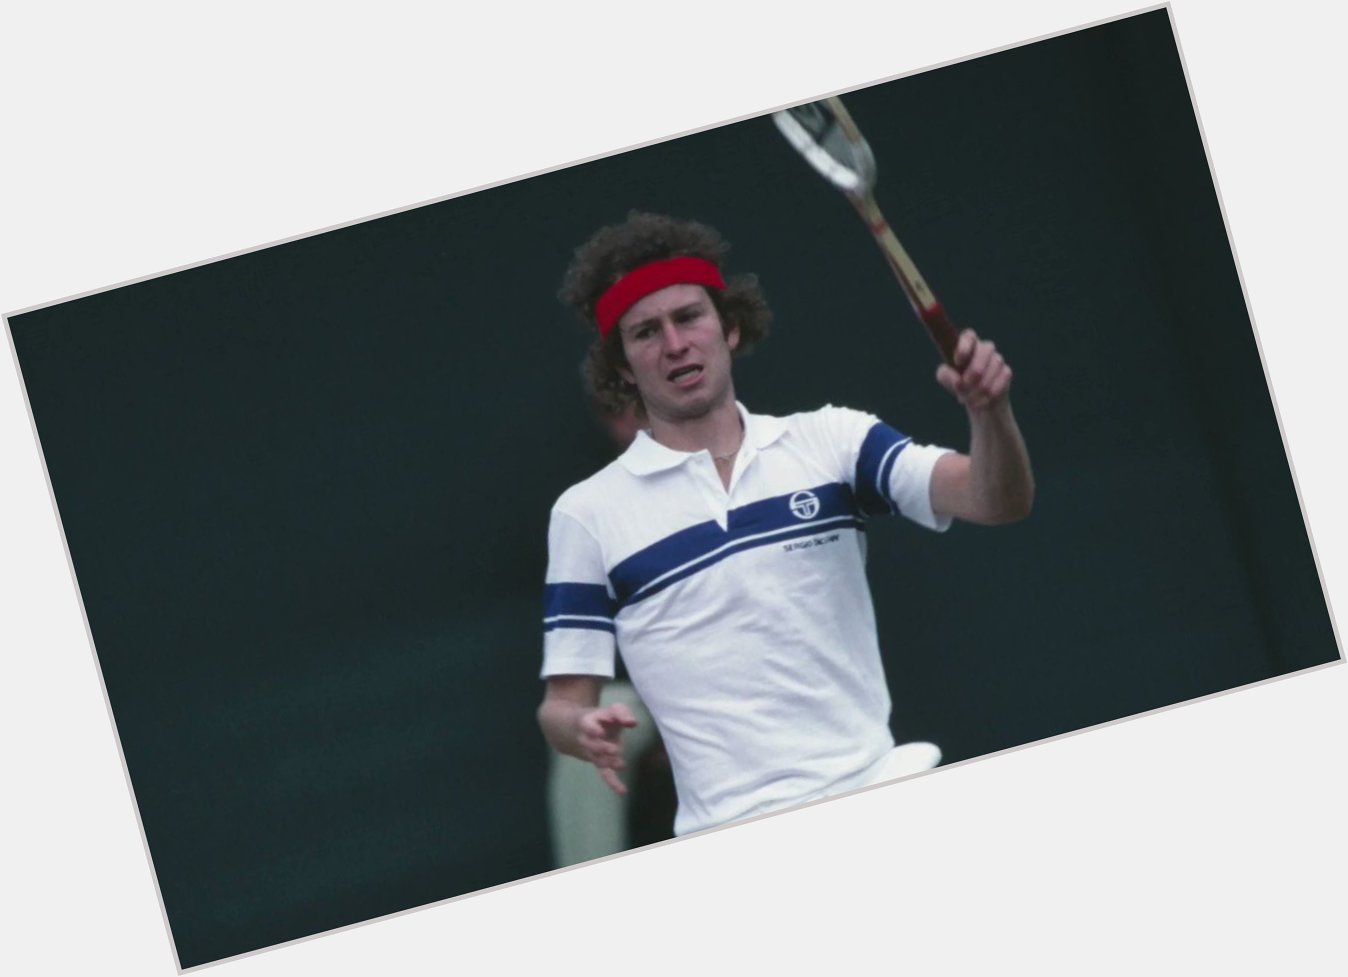 You cannot be serious!?

Join us in wishing a Happy Birthday to legend John McEnroe! 